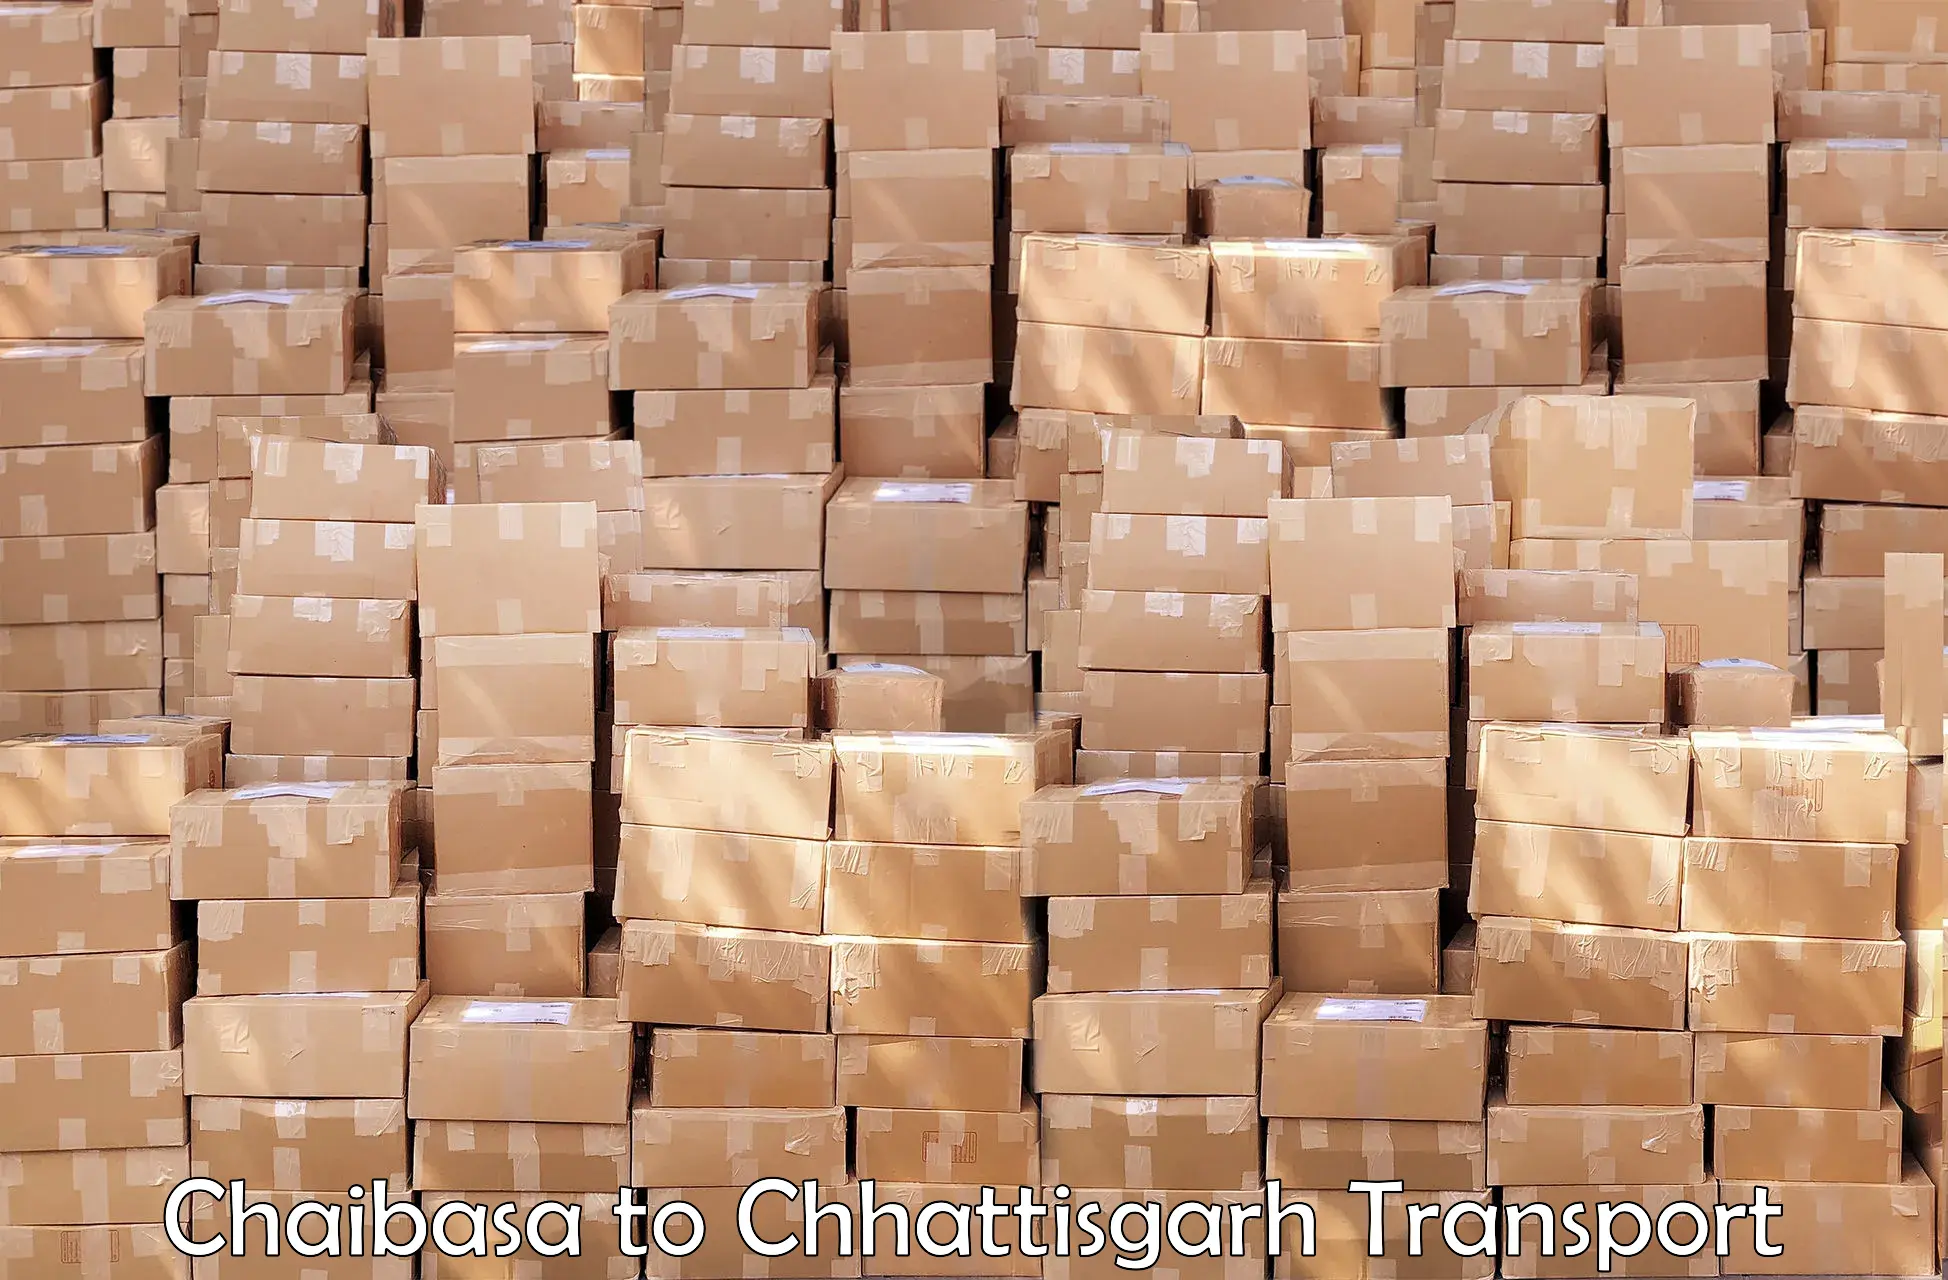 Truck transport companies in India Chaibasa to Durg